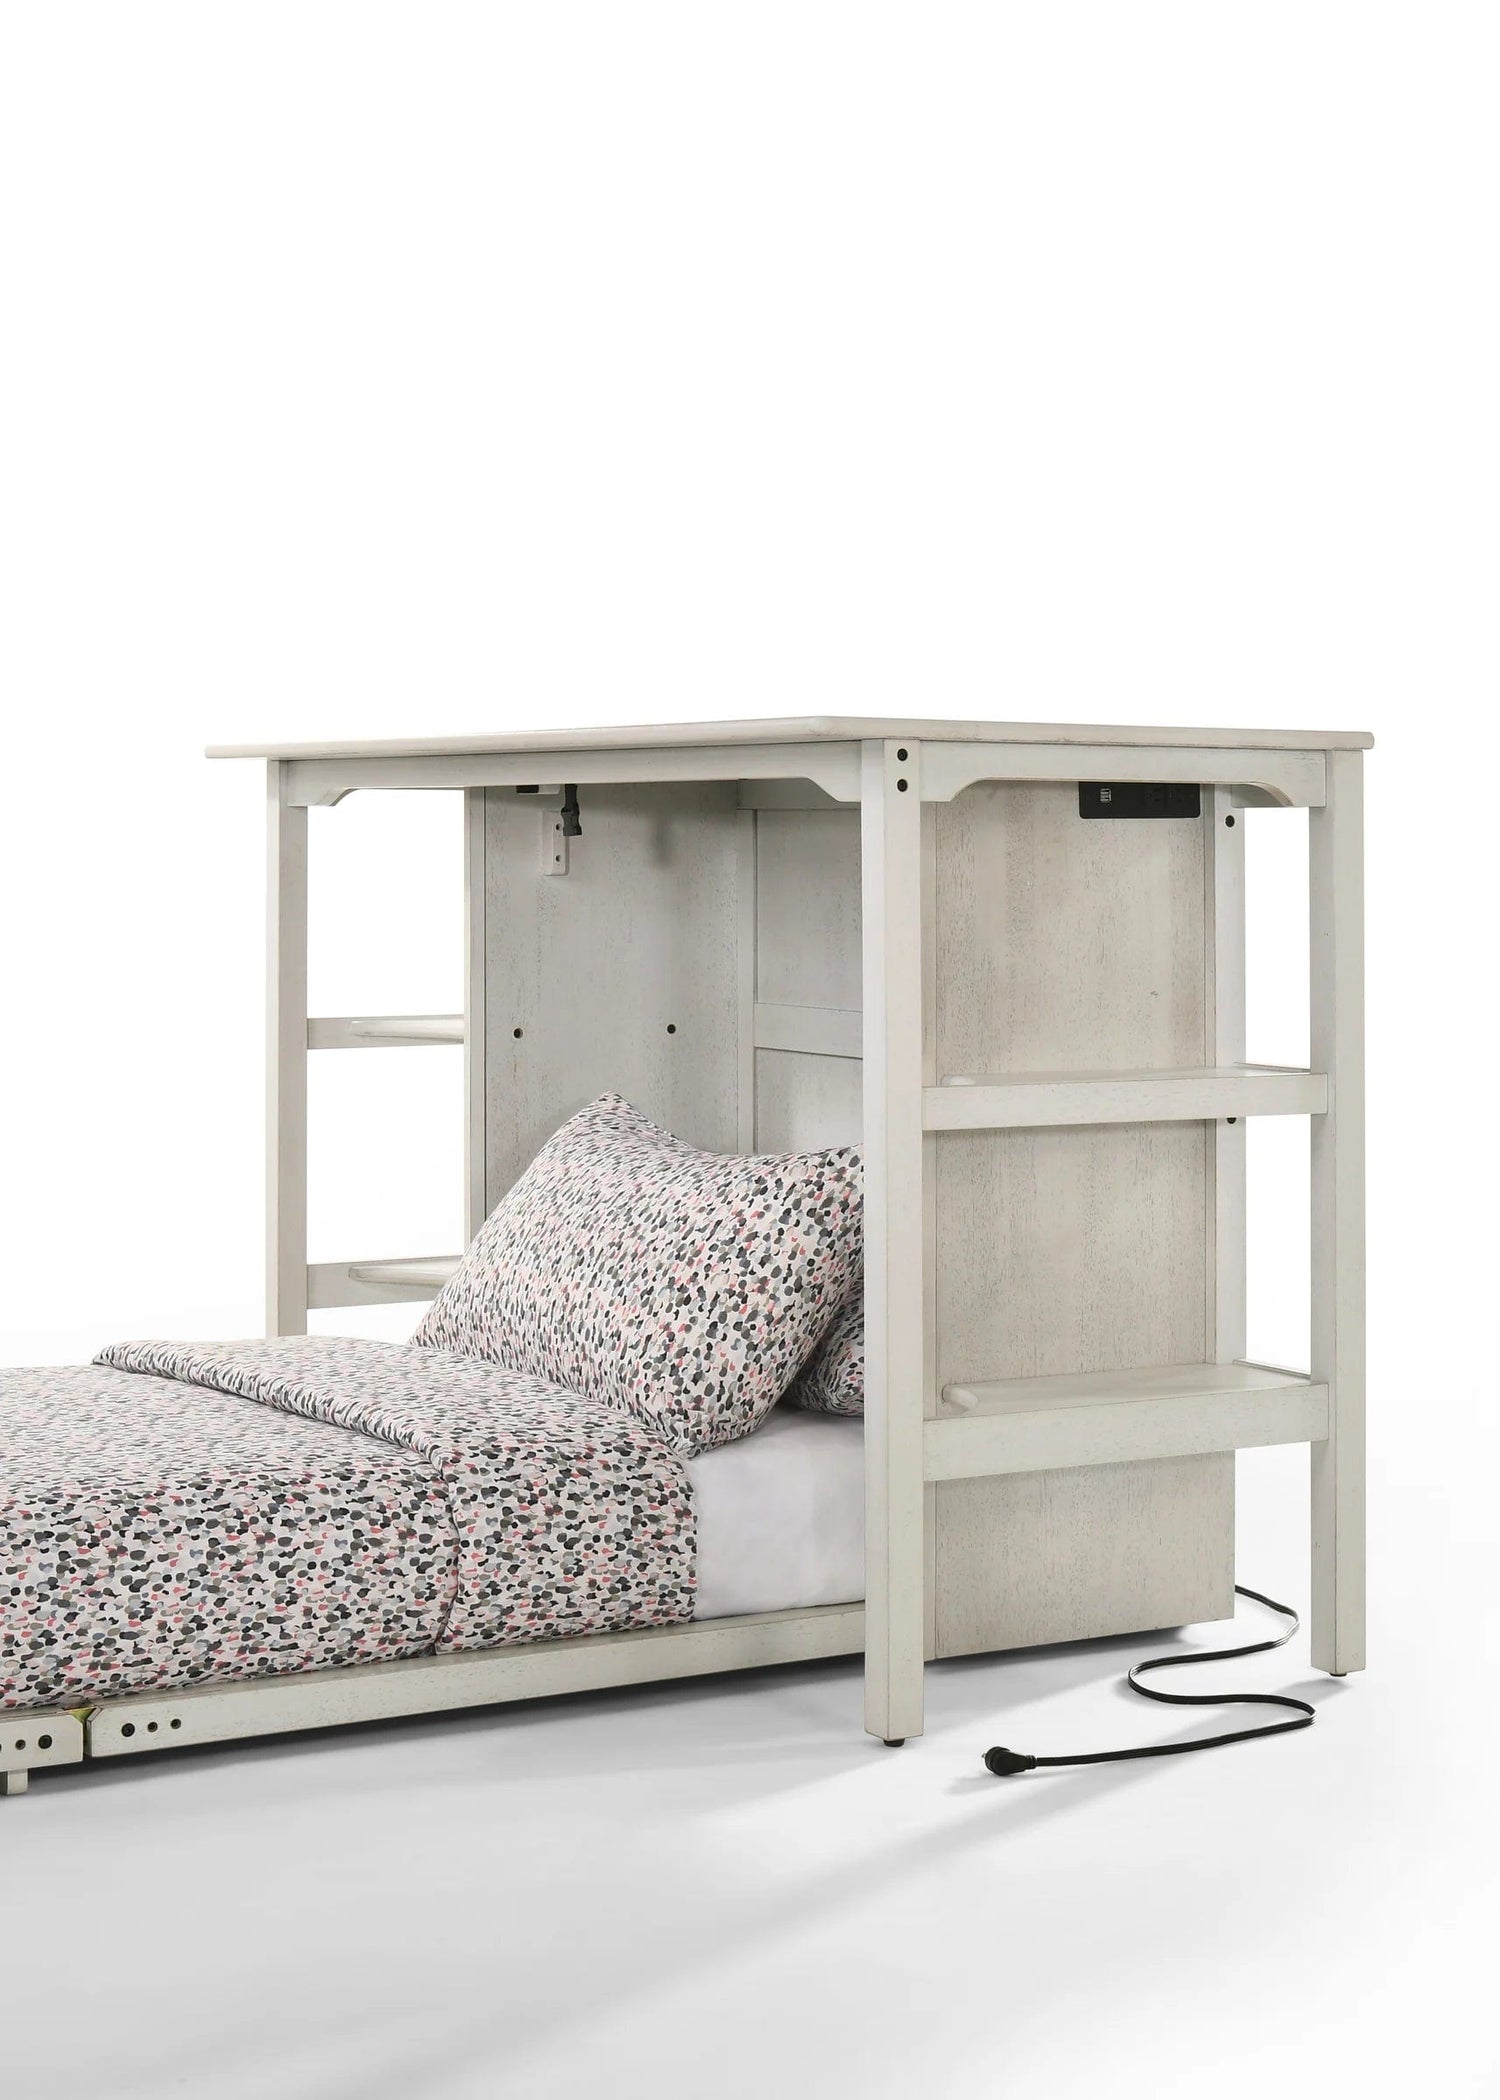 Night and Day Furniture Siesta Twin Desk Bed in Vintage White with Mattress and Chair